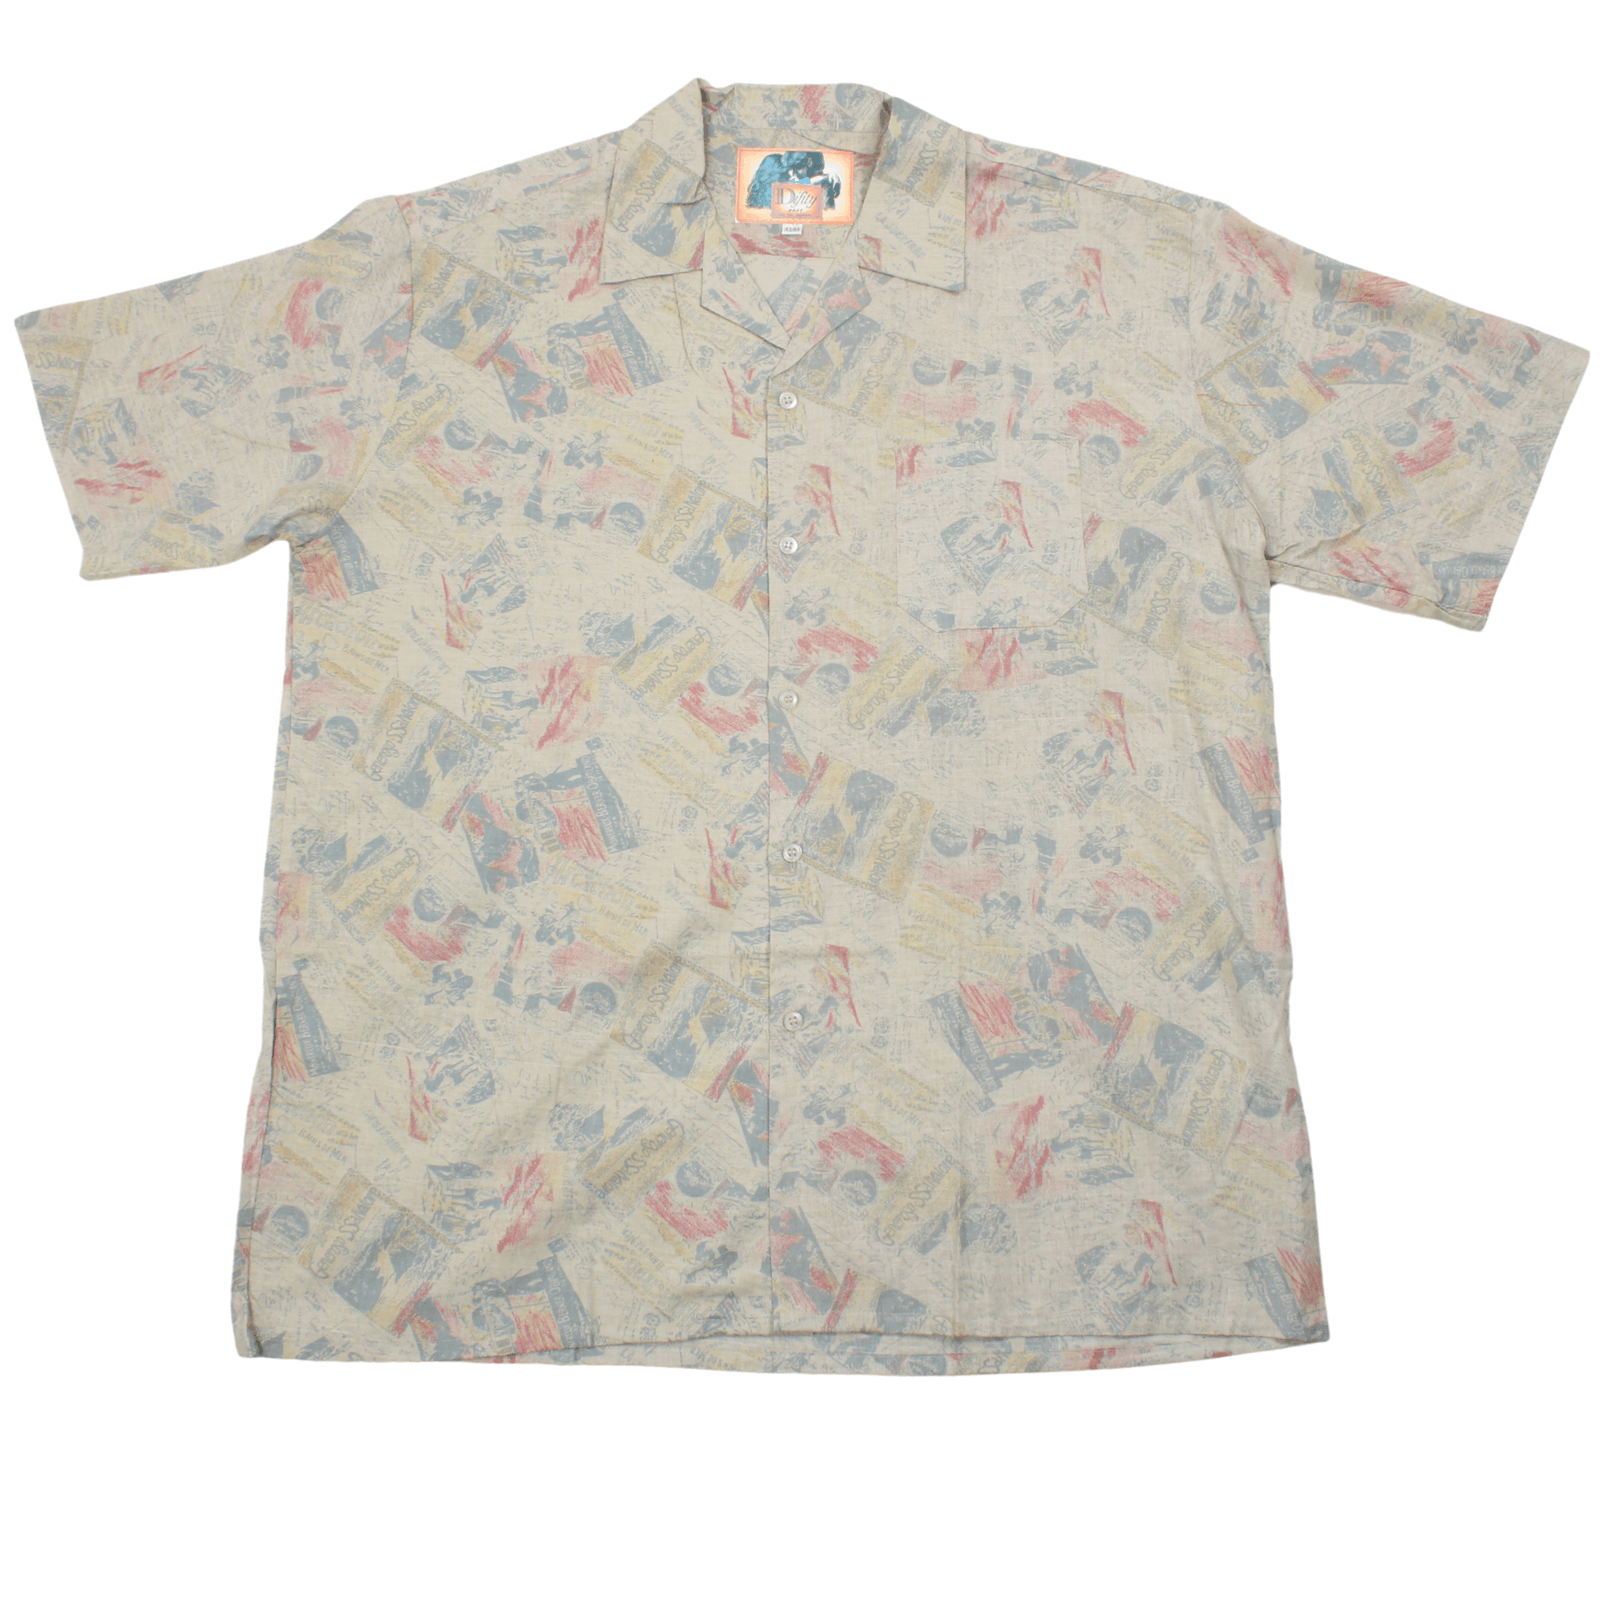 Vintage Jazzy Patterned Shirt (XL)